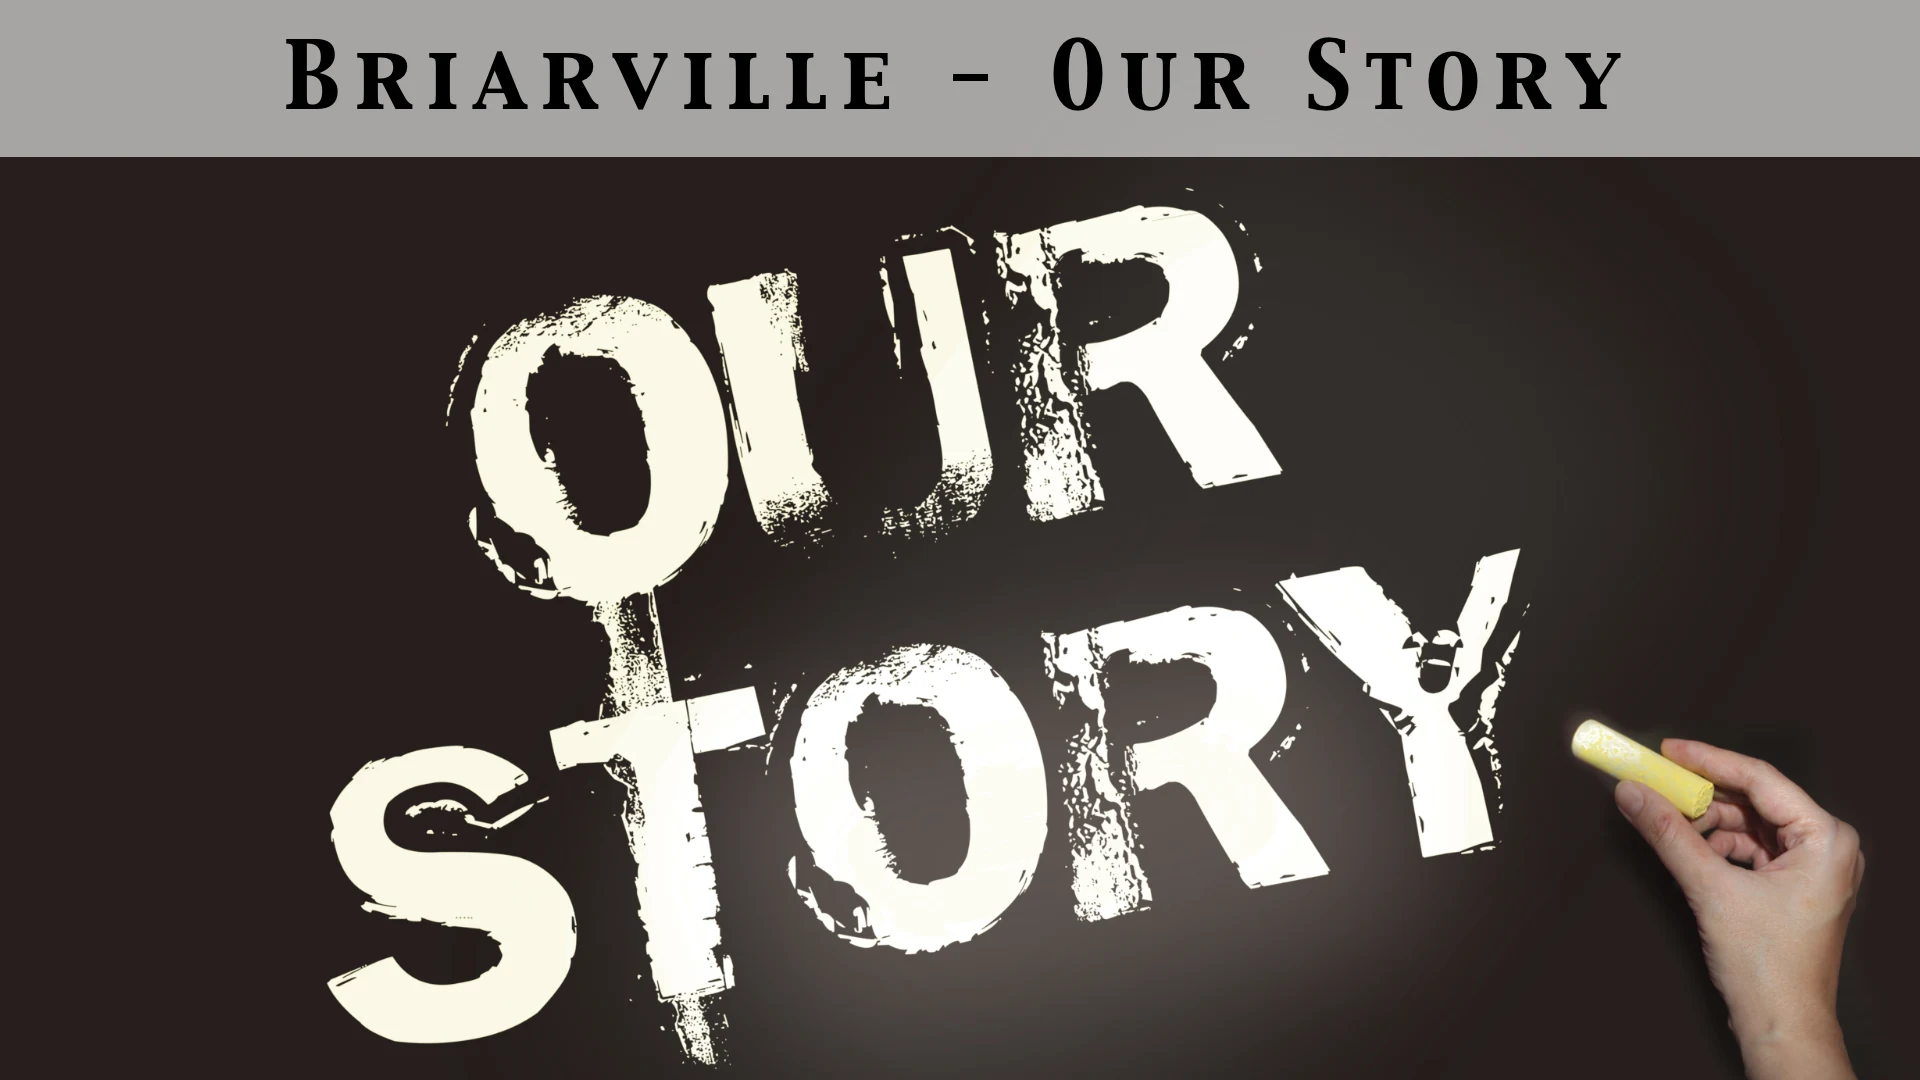 BRIARVILLE - OUR STORY